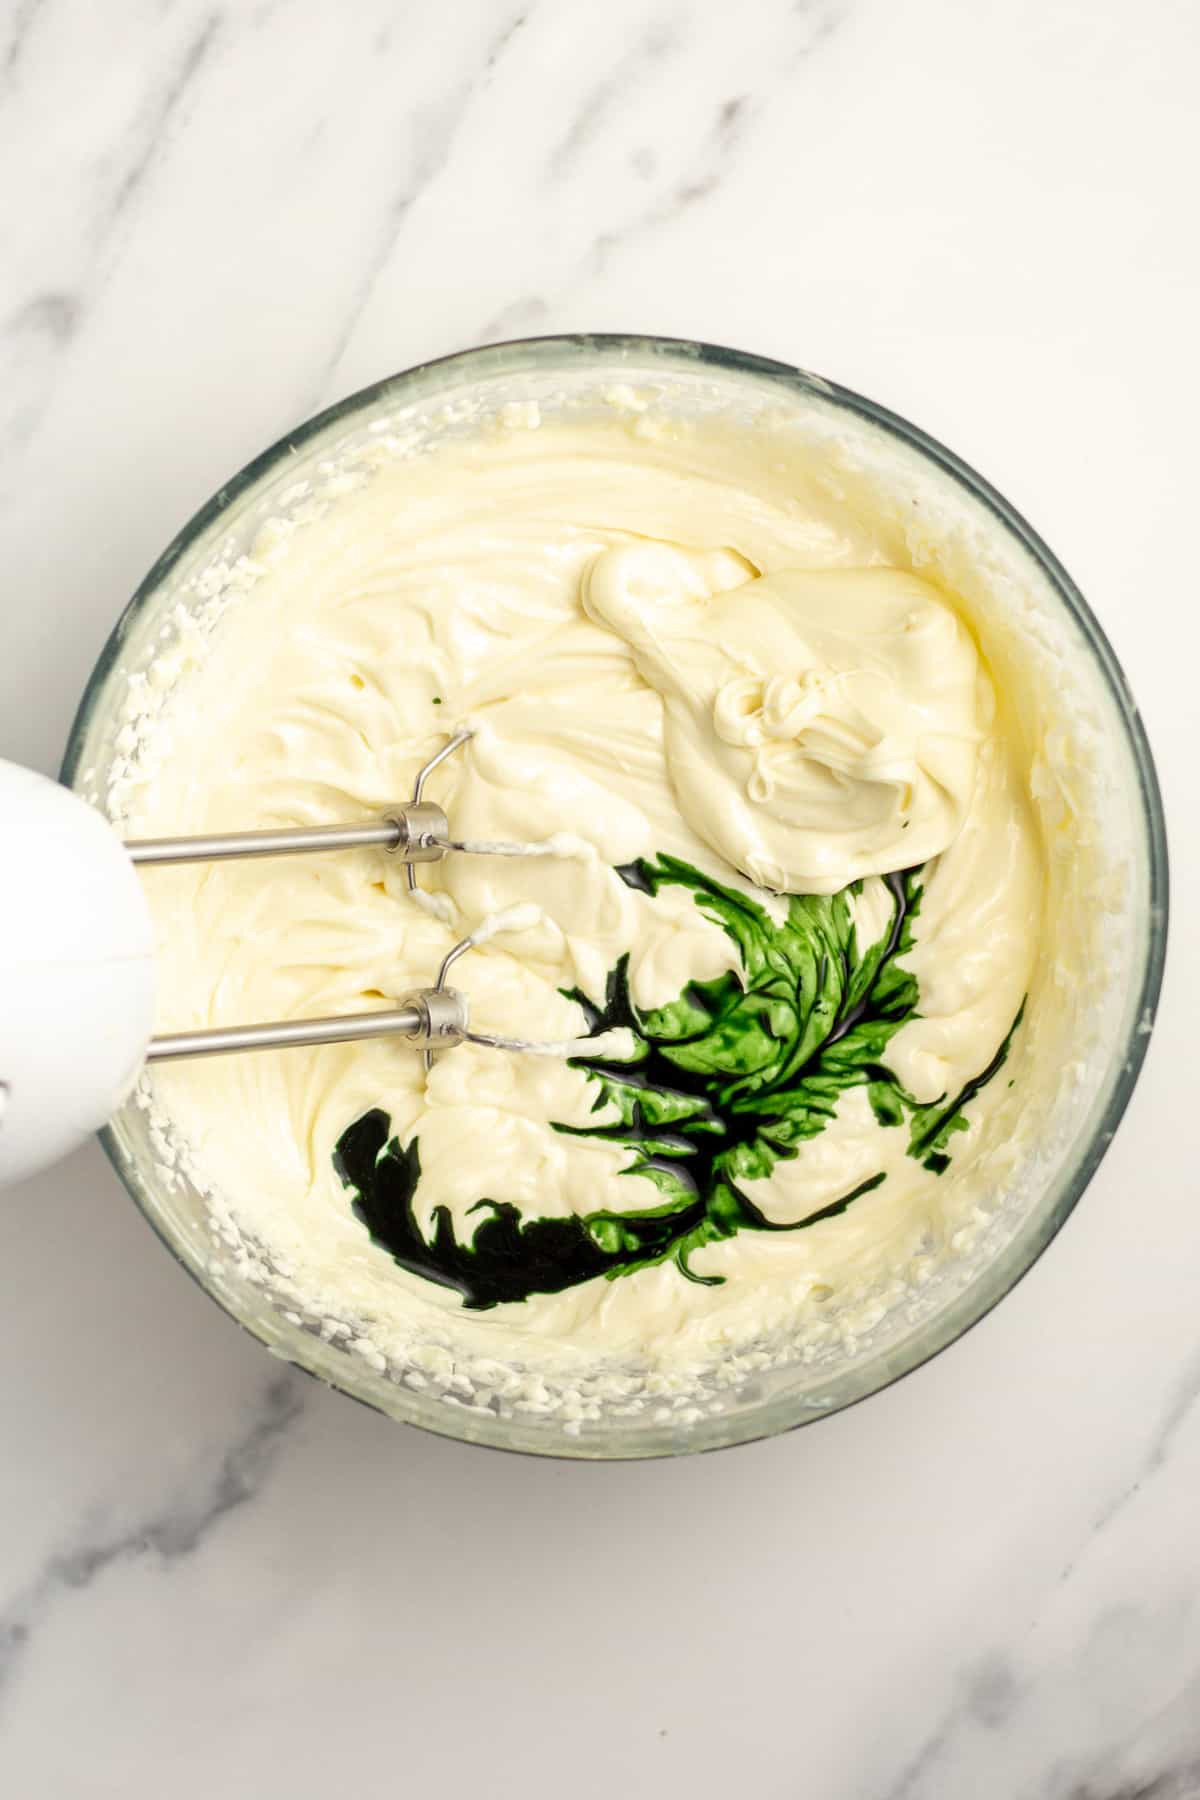 creme de menthe being added to cream cheese batter